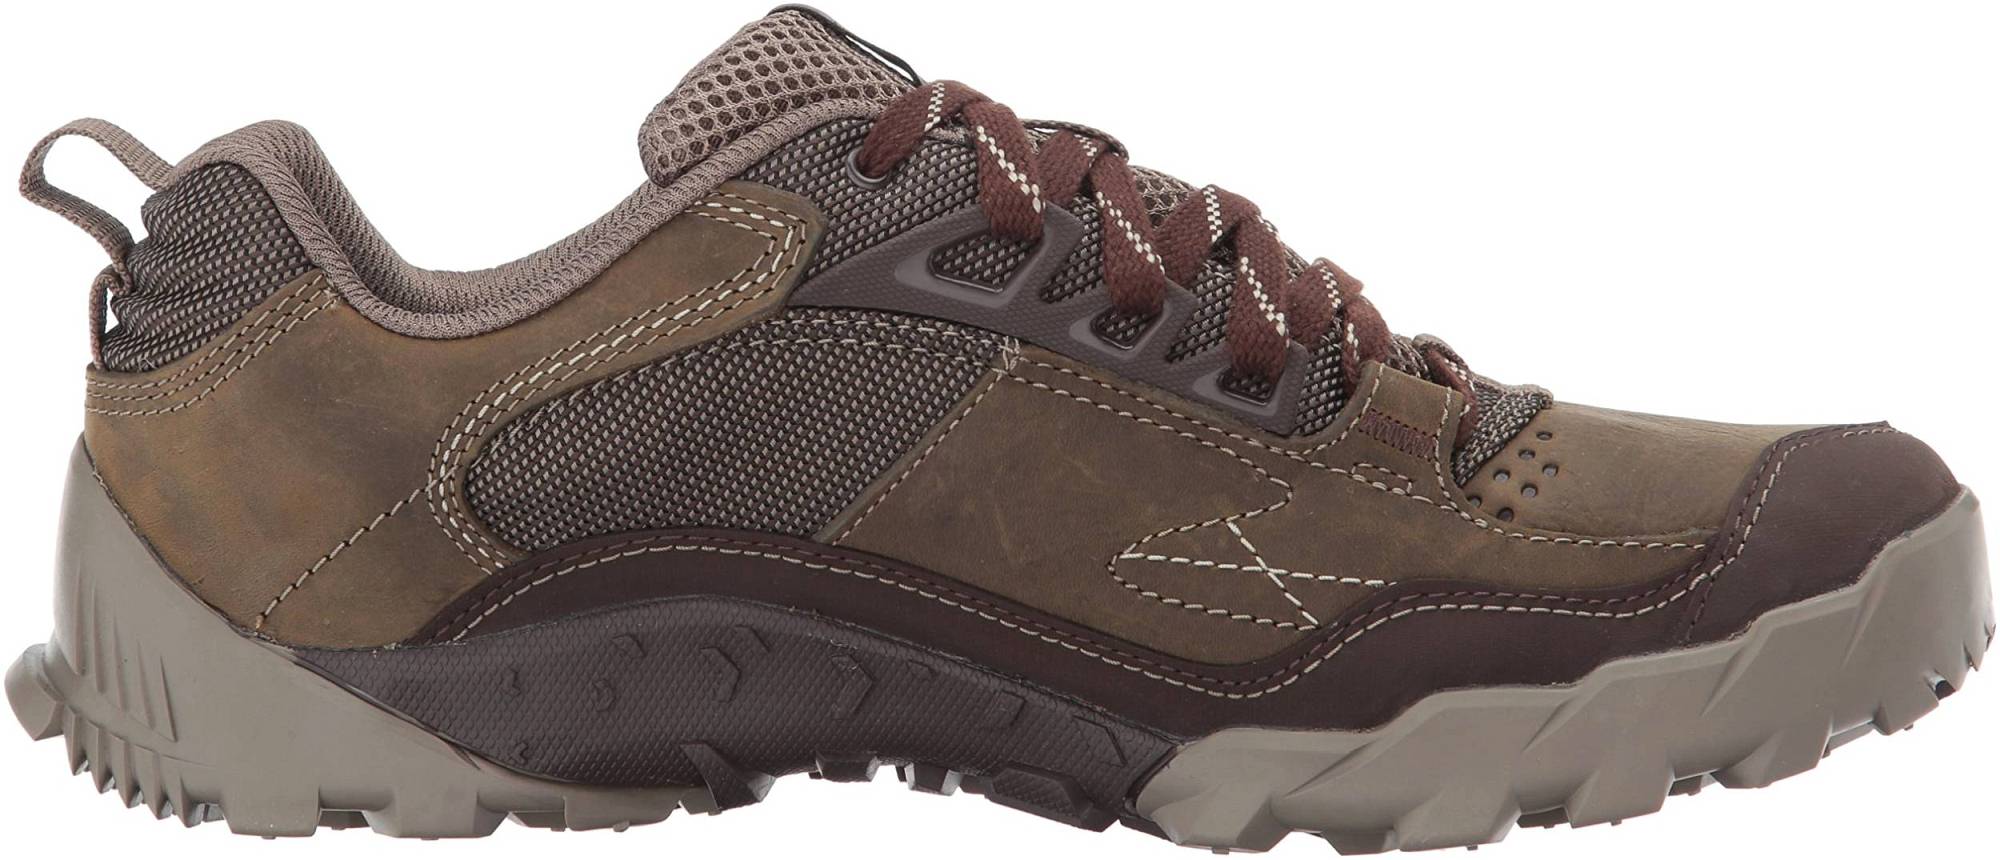 Merrell Annex Trak Low – Shoes Reviews & Reasons To Buy